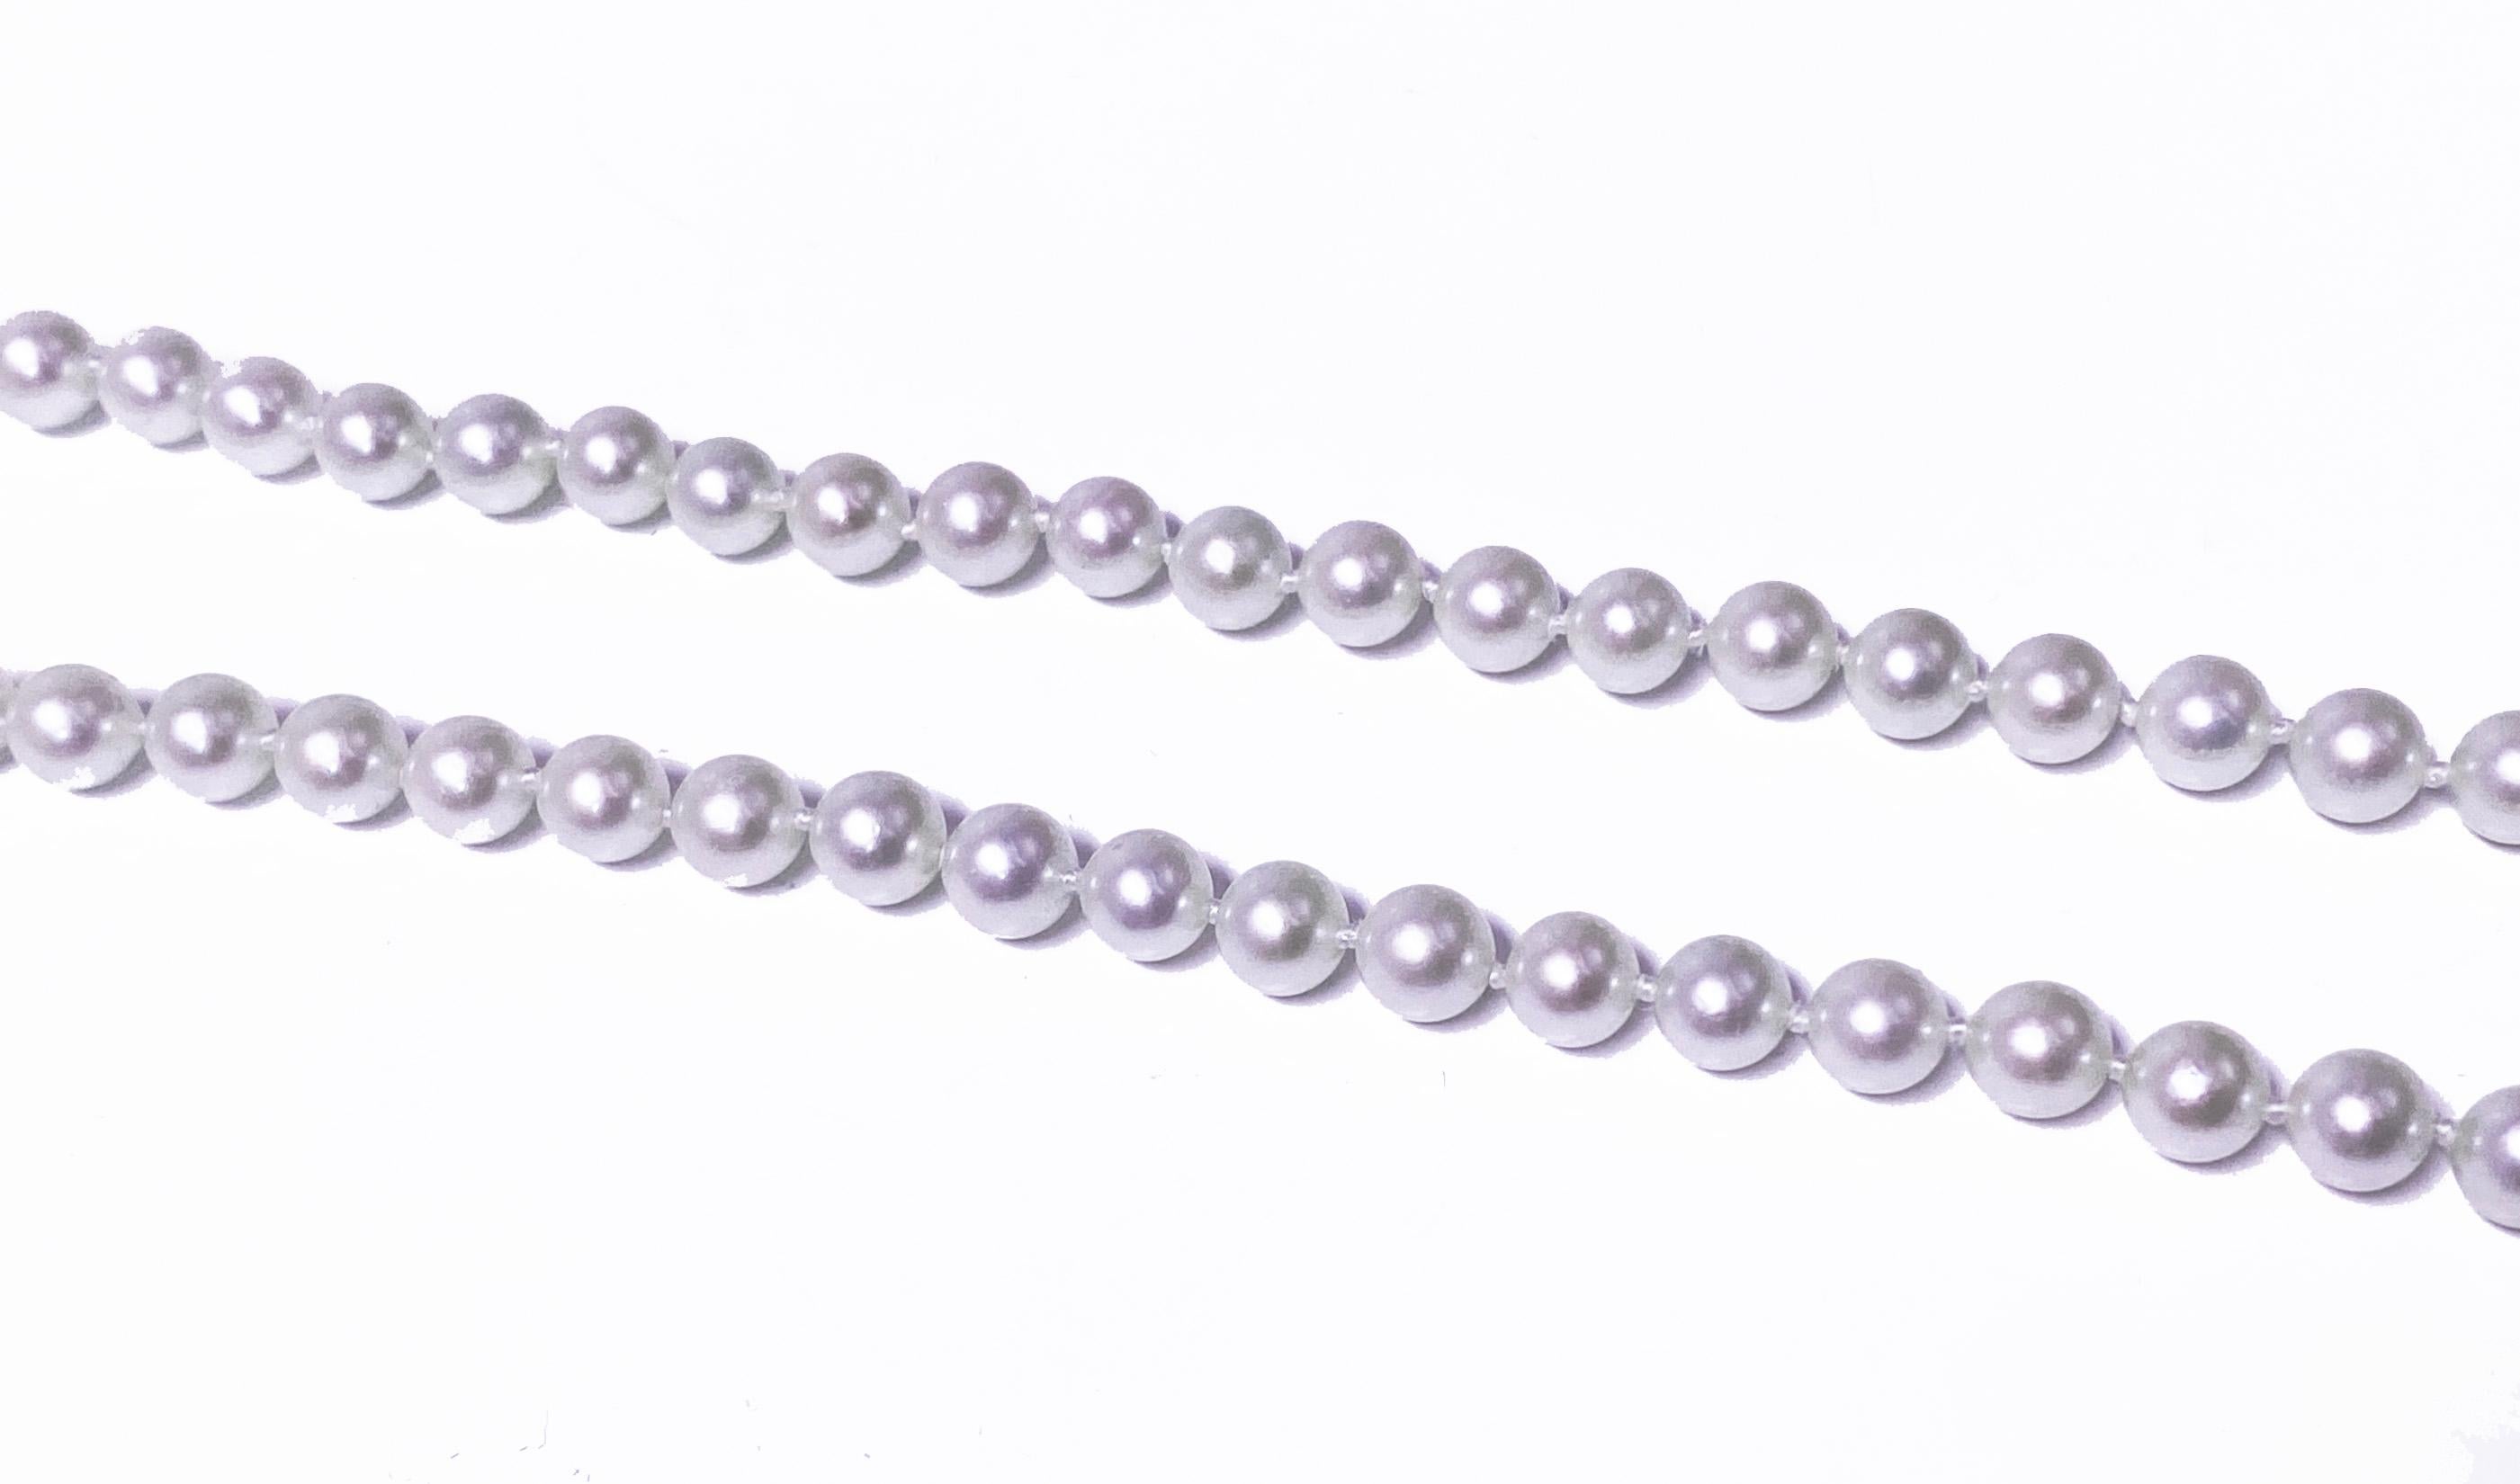 22 inch Strand of Cultured Fresh Water Pearl Necklace comprising 79 well matched round cultured pearls gauging approximately 6.00 - 6.50 mm, cream -white, slight rose overtone, medium - high lustre, medium - thick nacre, very slightly blemished,